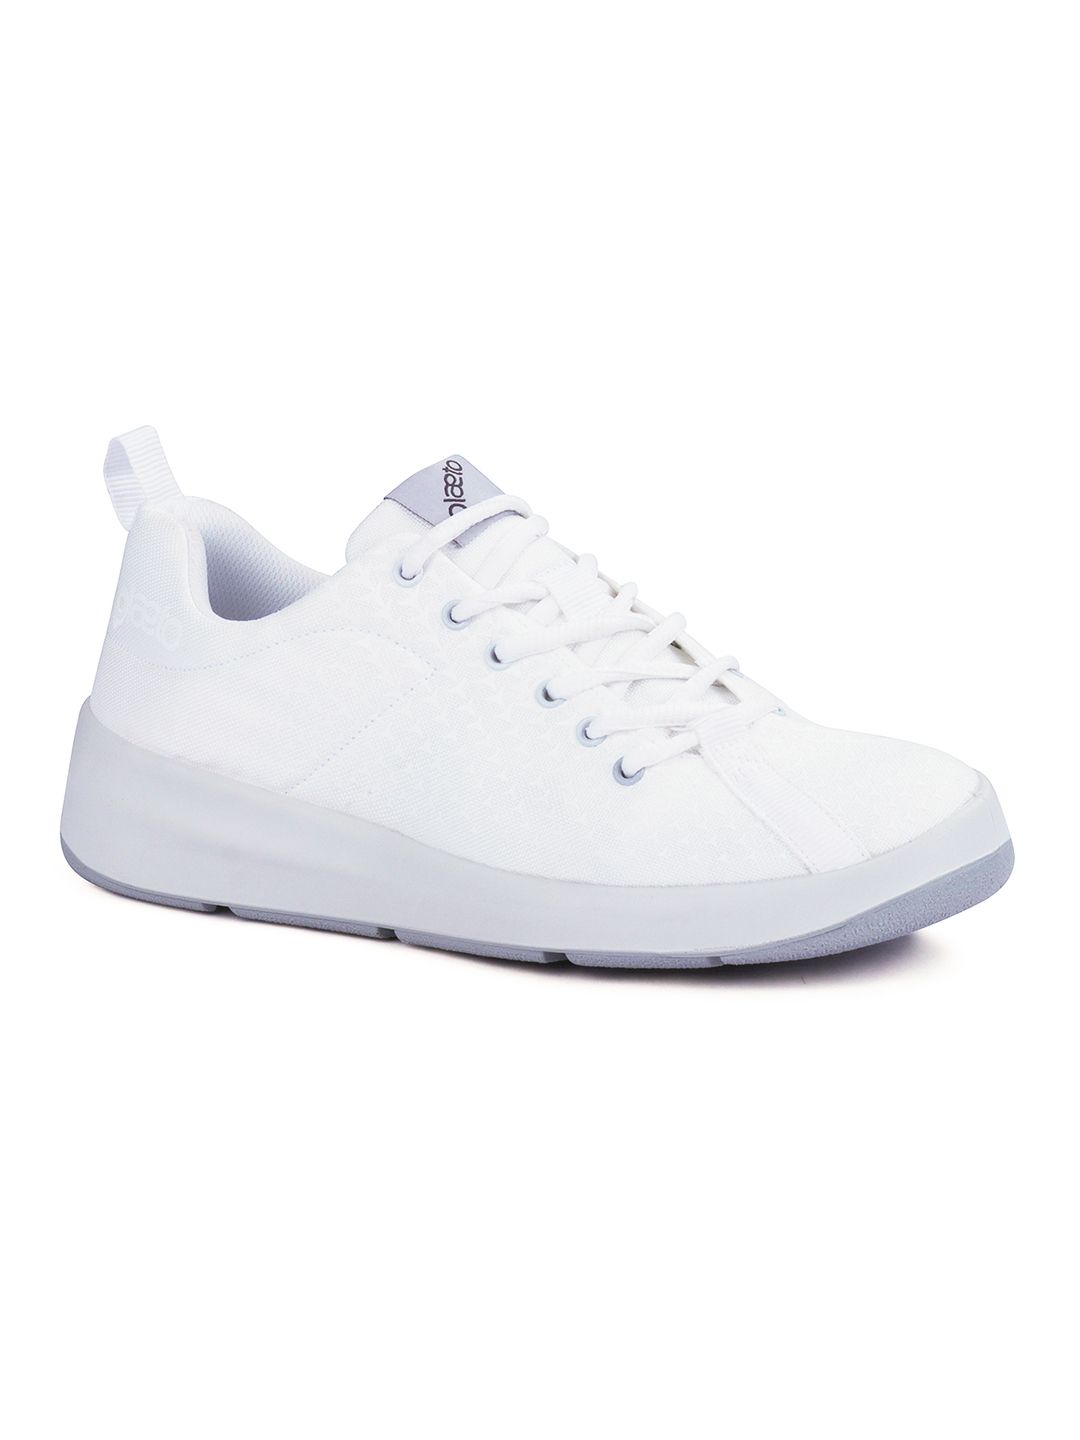 plaeto Unisex Sneakers Non-Marking Multiplay Sports Shoes Price in India